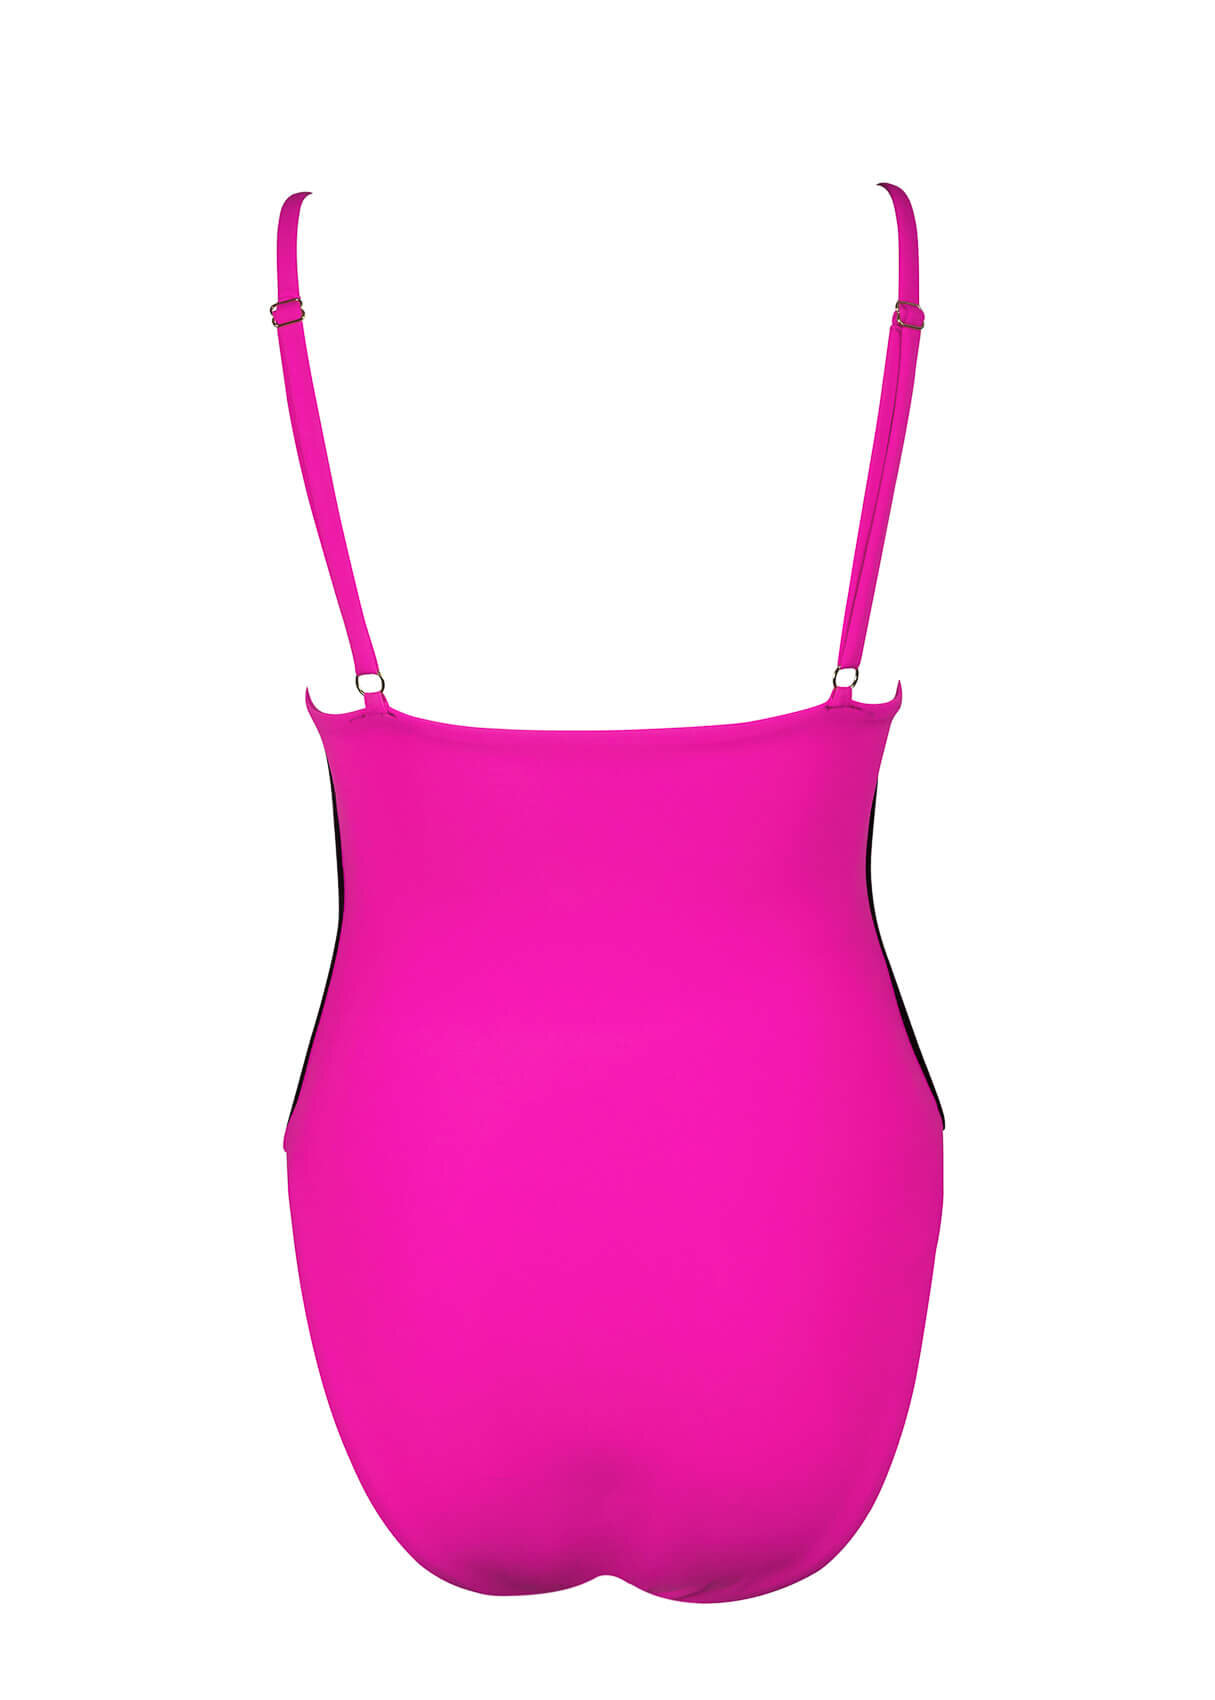 back of birds nest pink one piece bathing suit